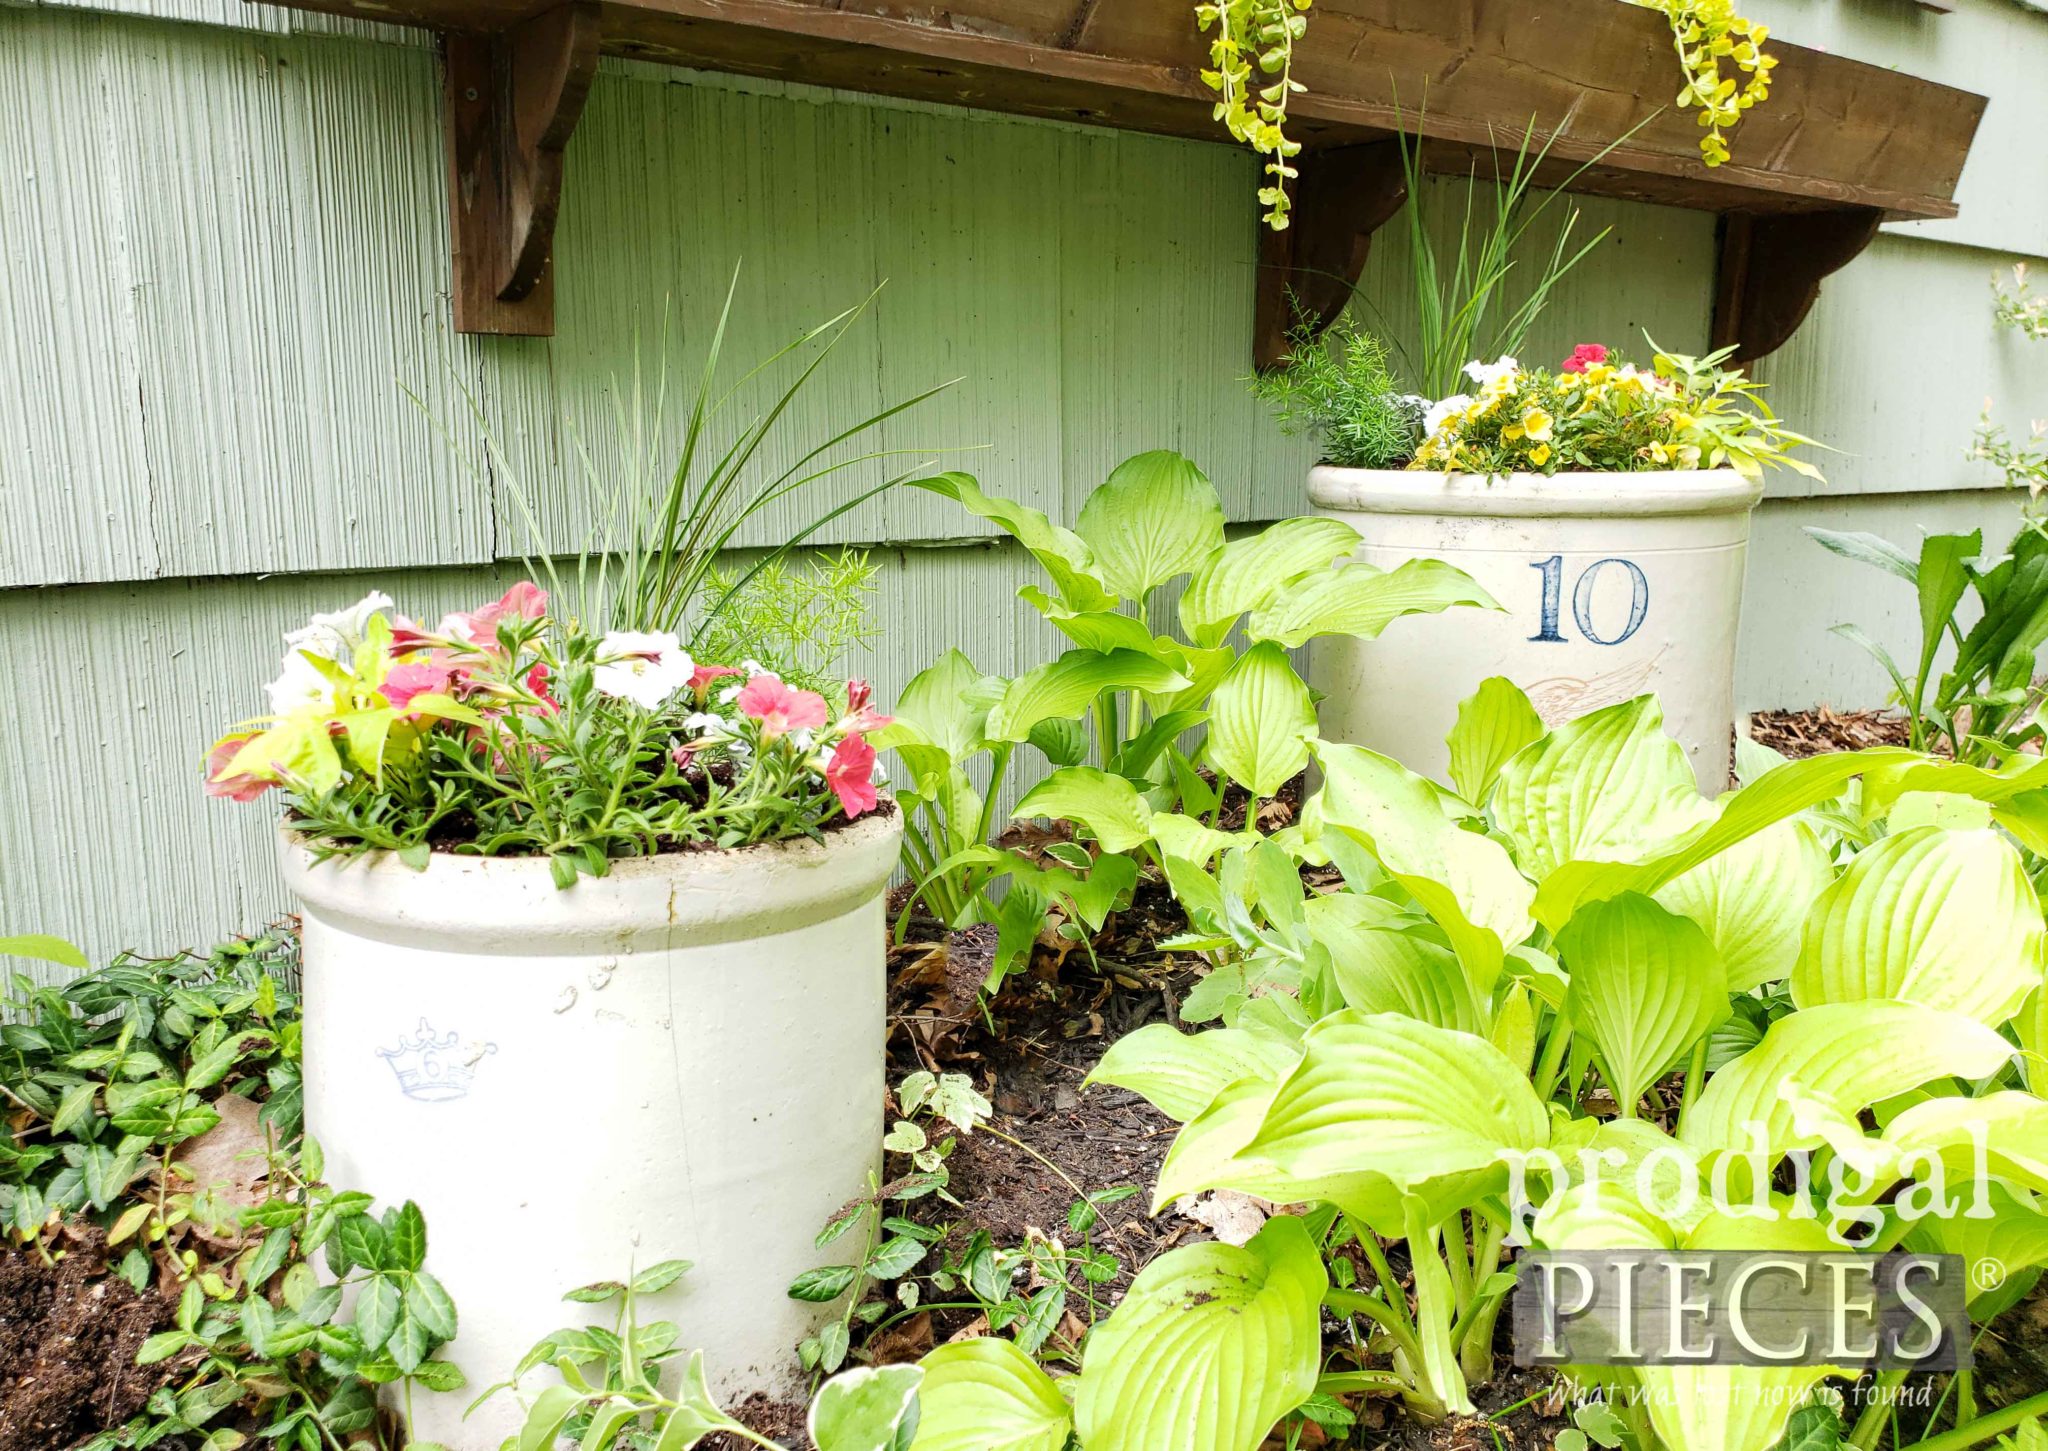 Repurposed Antique Crock Planters as demonstrated by Larissa of Prodigal Pieces | prodigalpieces.com #prodigalpieces #diy #home #garden #flowers